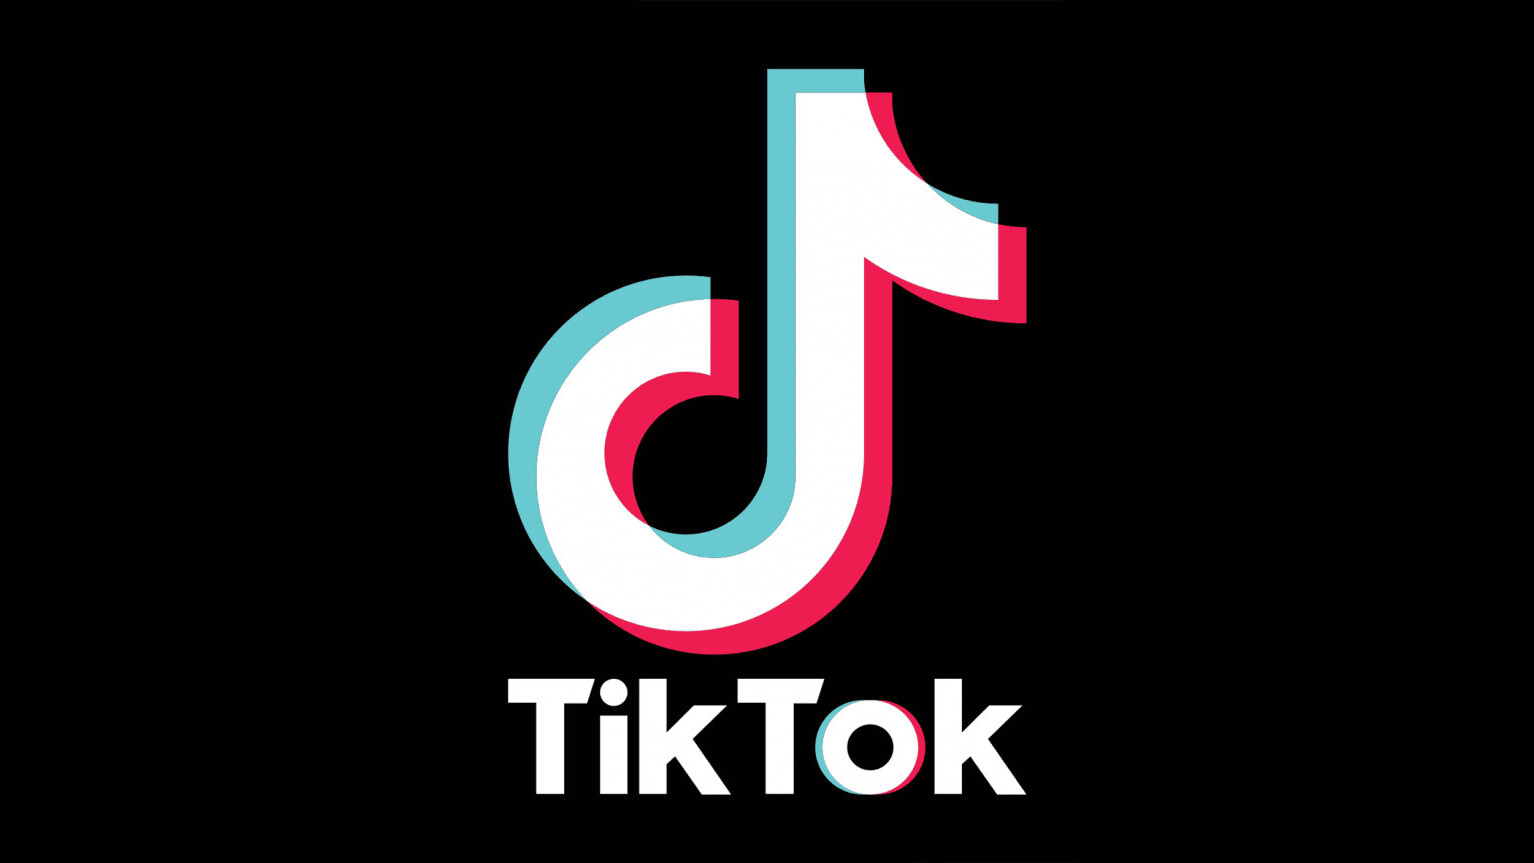 TikTok’s parent company appears to have acquired AI music startup Jukedeck